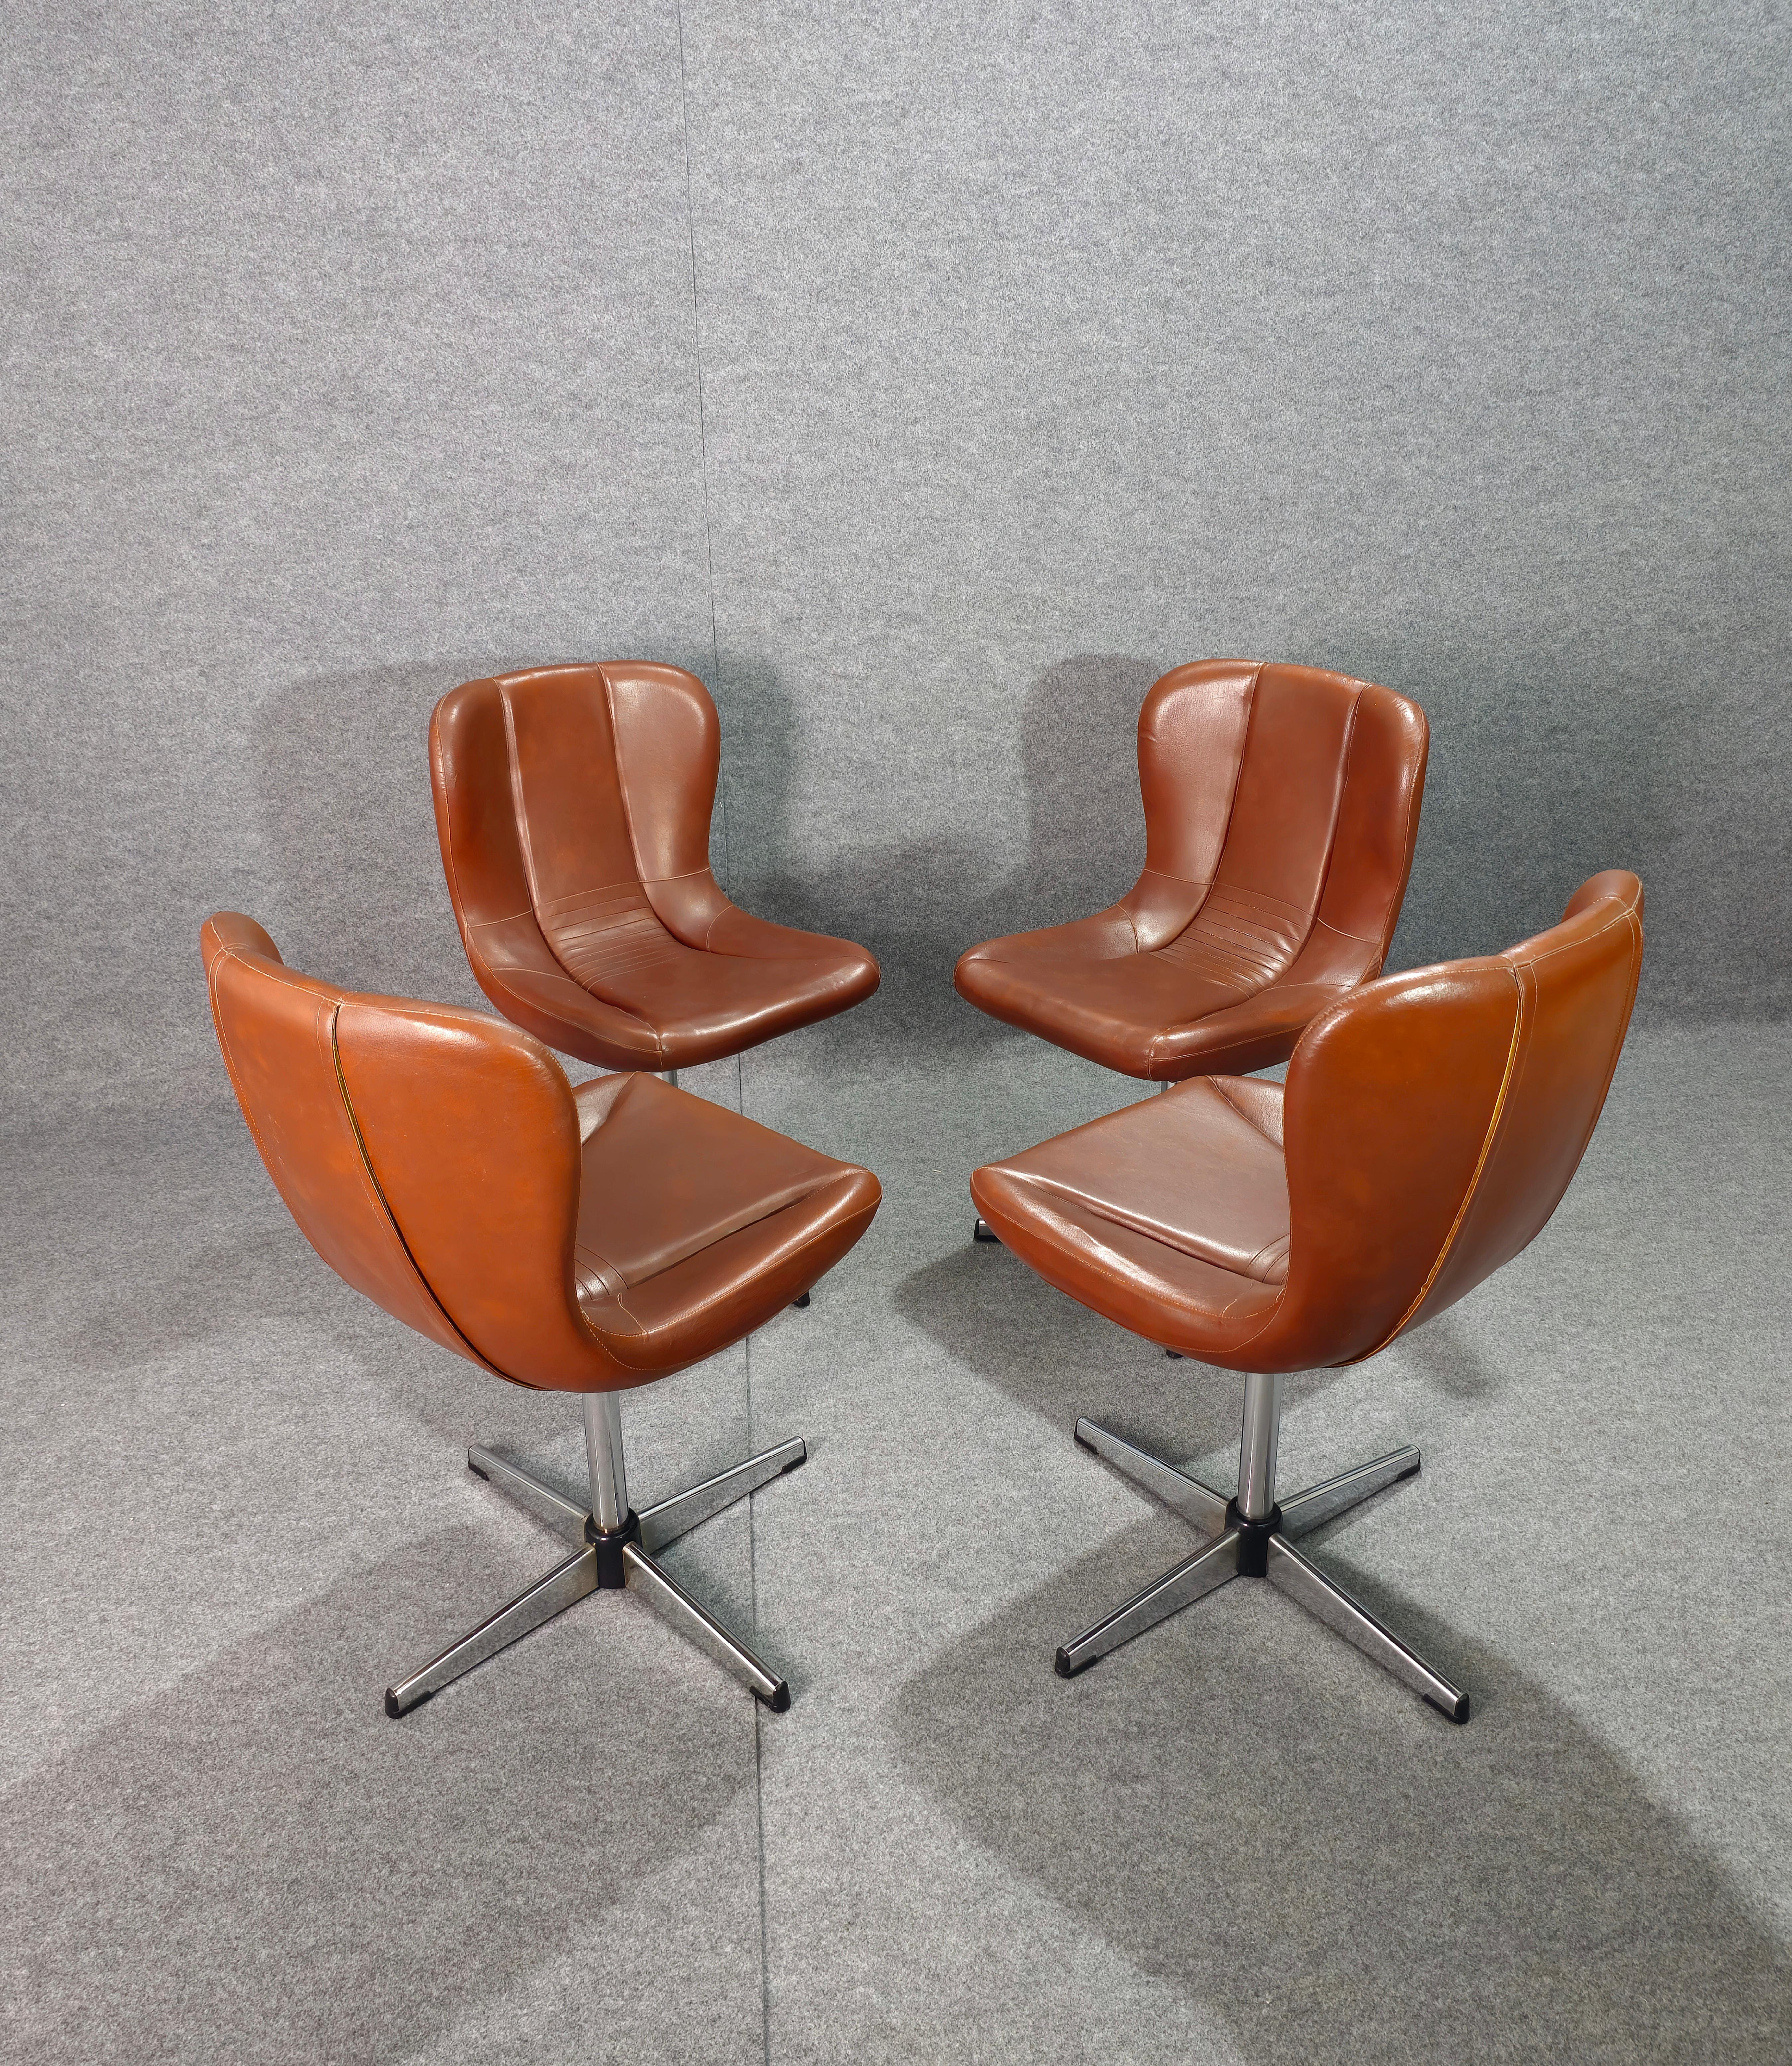 Set of 4 anatomically shaped swivel armchairs/chairs produced in Italy in the 1960s/70s.
Each armchair/chair was made with a wooden structure, quadripod support in chromed metal, curved seat and backrest with leather upholstery in shades of